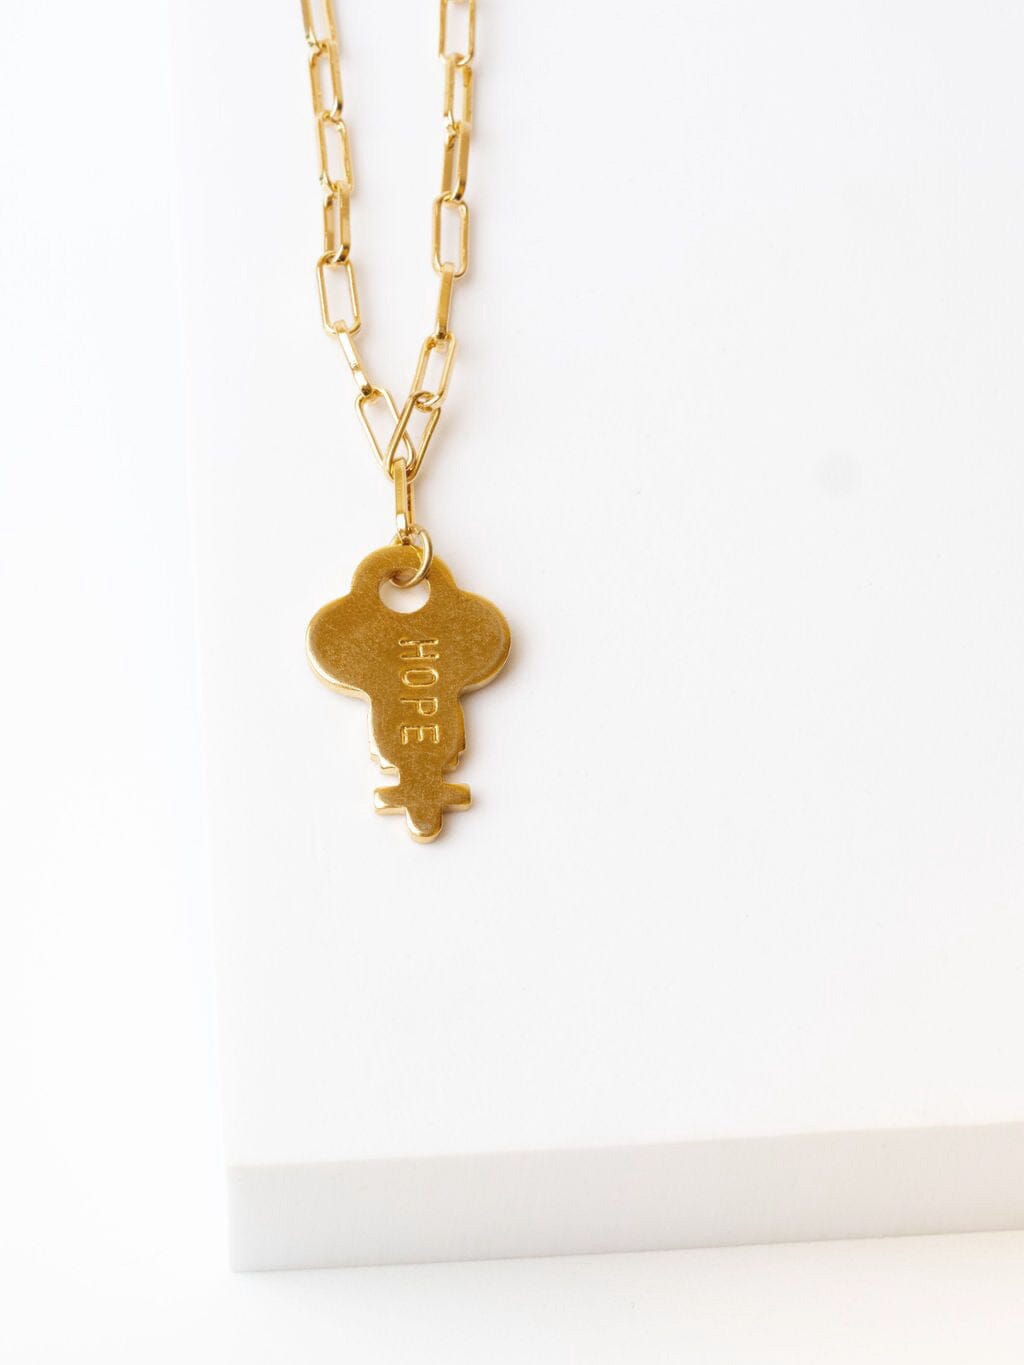 N - Brooklyn Dainty Key Necklace Necklaces The Giving Keys 